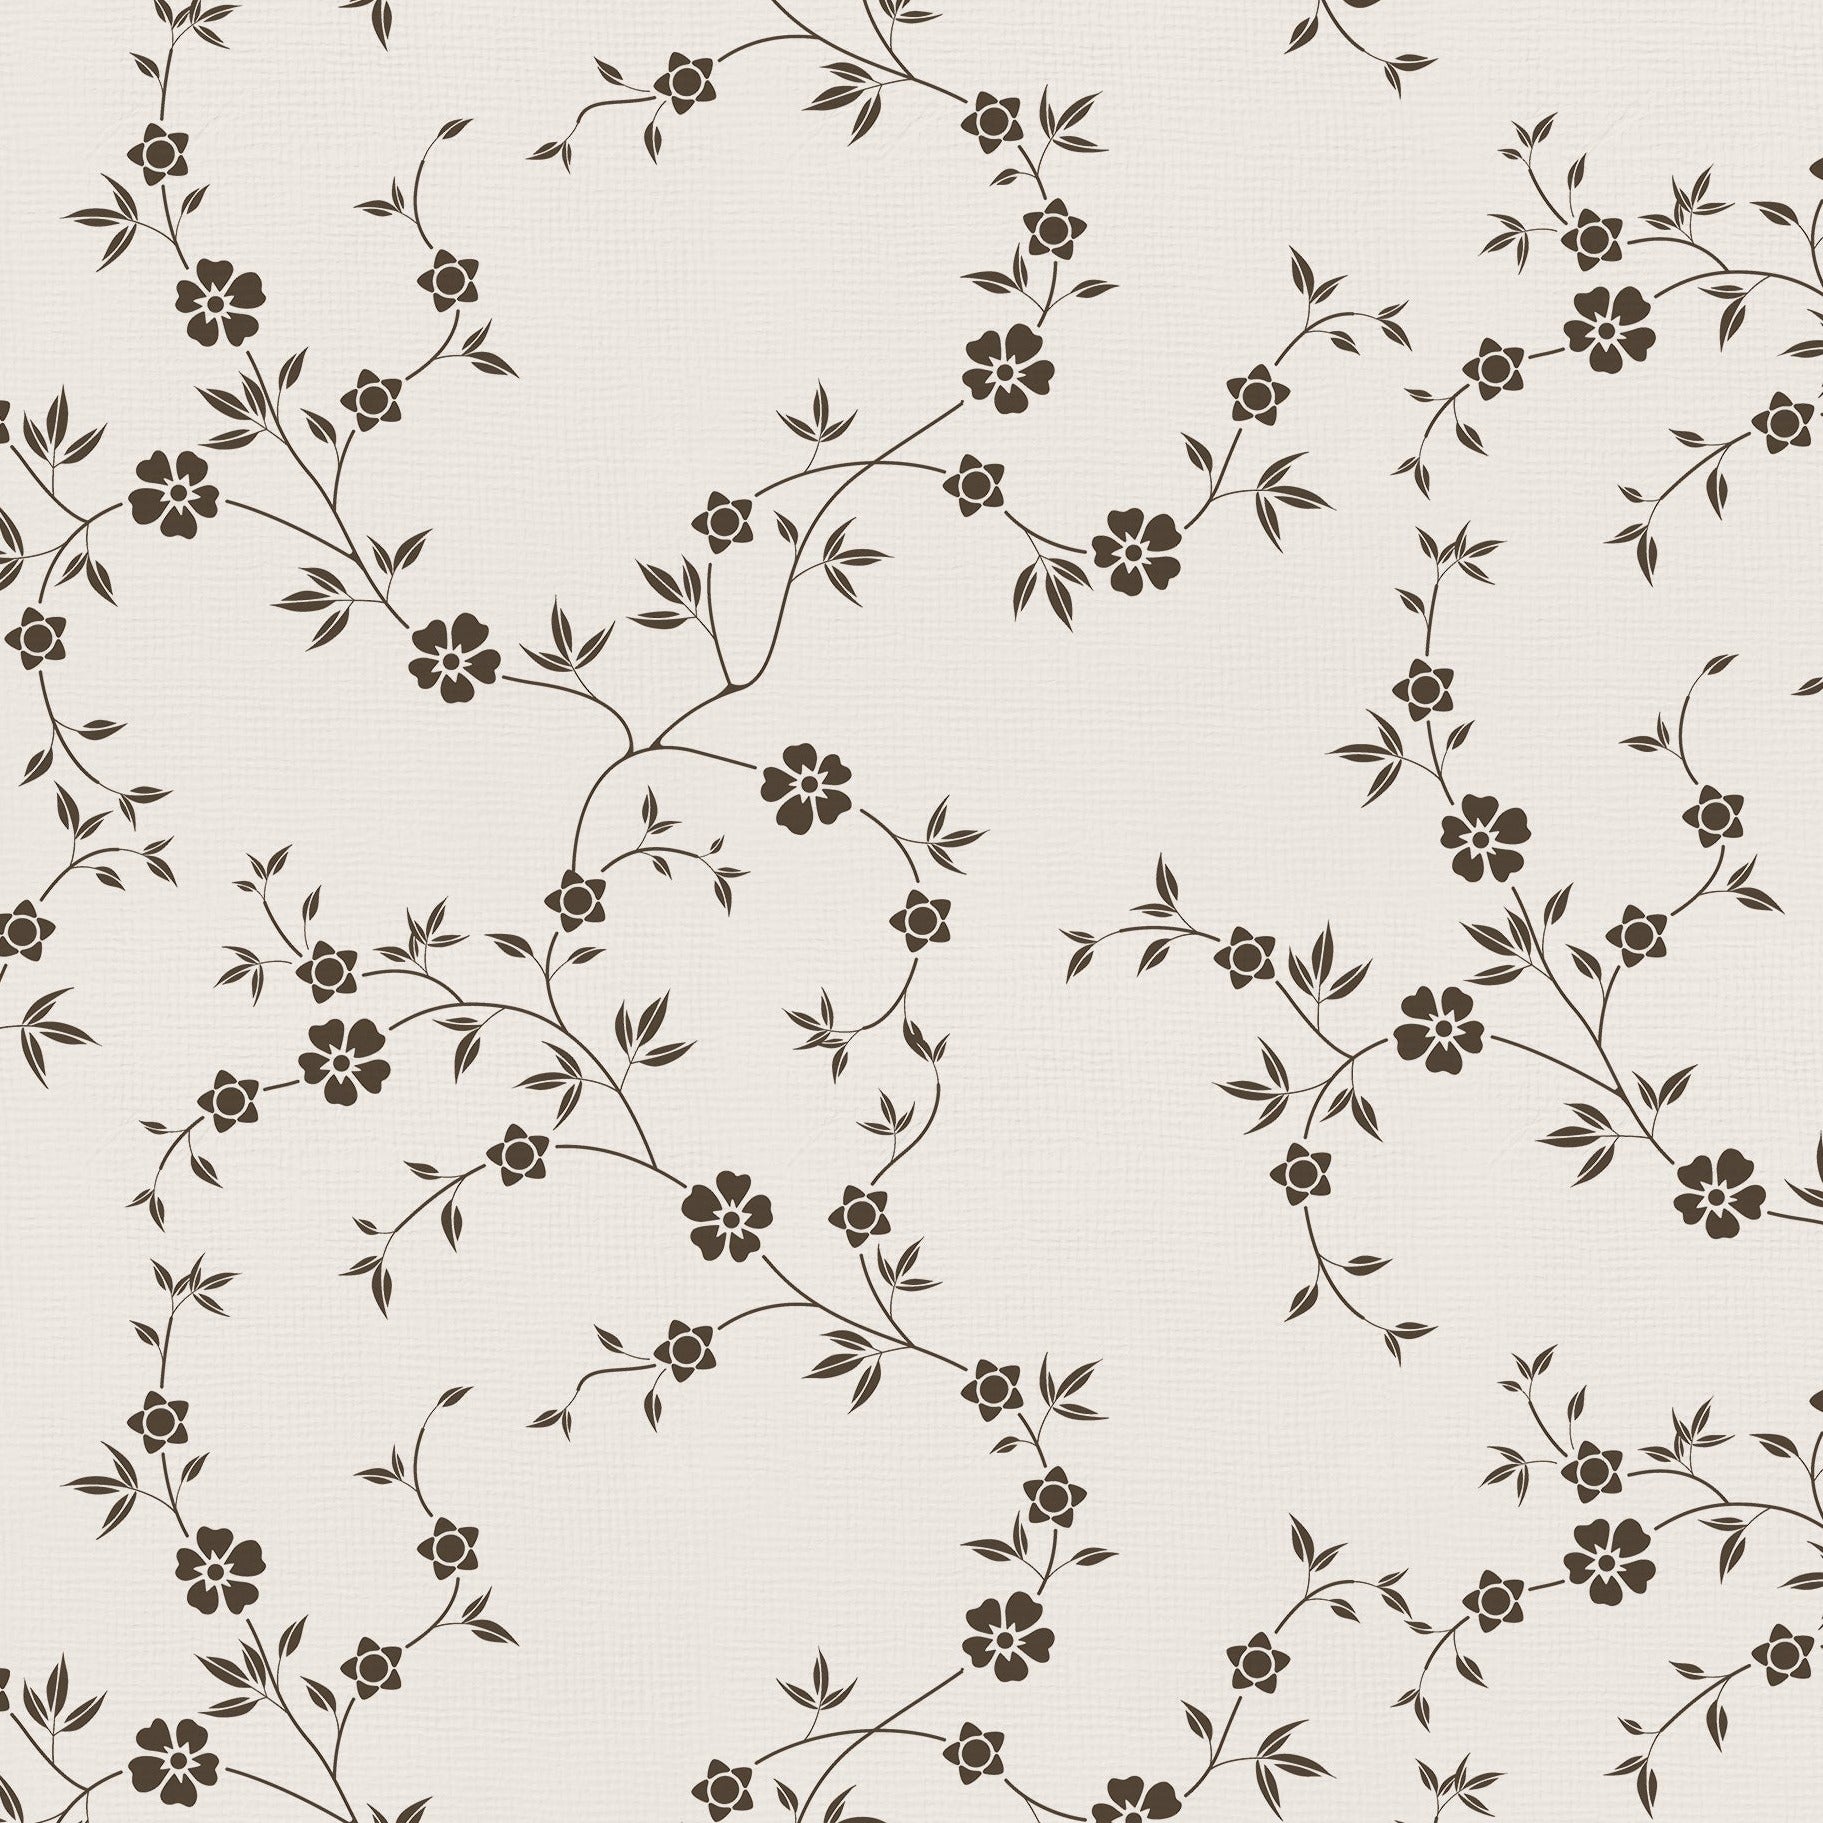 This image is a straightforward depiction of the "Mini Charming Floral Wallpaper - Deep Brown", focusing on the pattern. It shows the continuous small-scale print of brown florals and green foliage on a light neutral base, which conveys a sense of vintage elegance suitable for various interior styles.